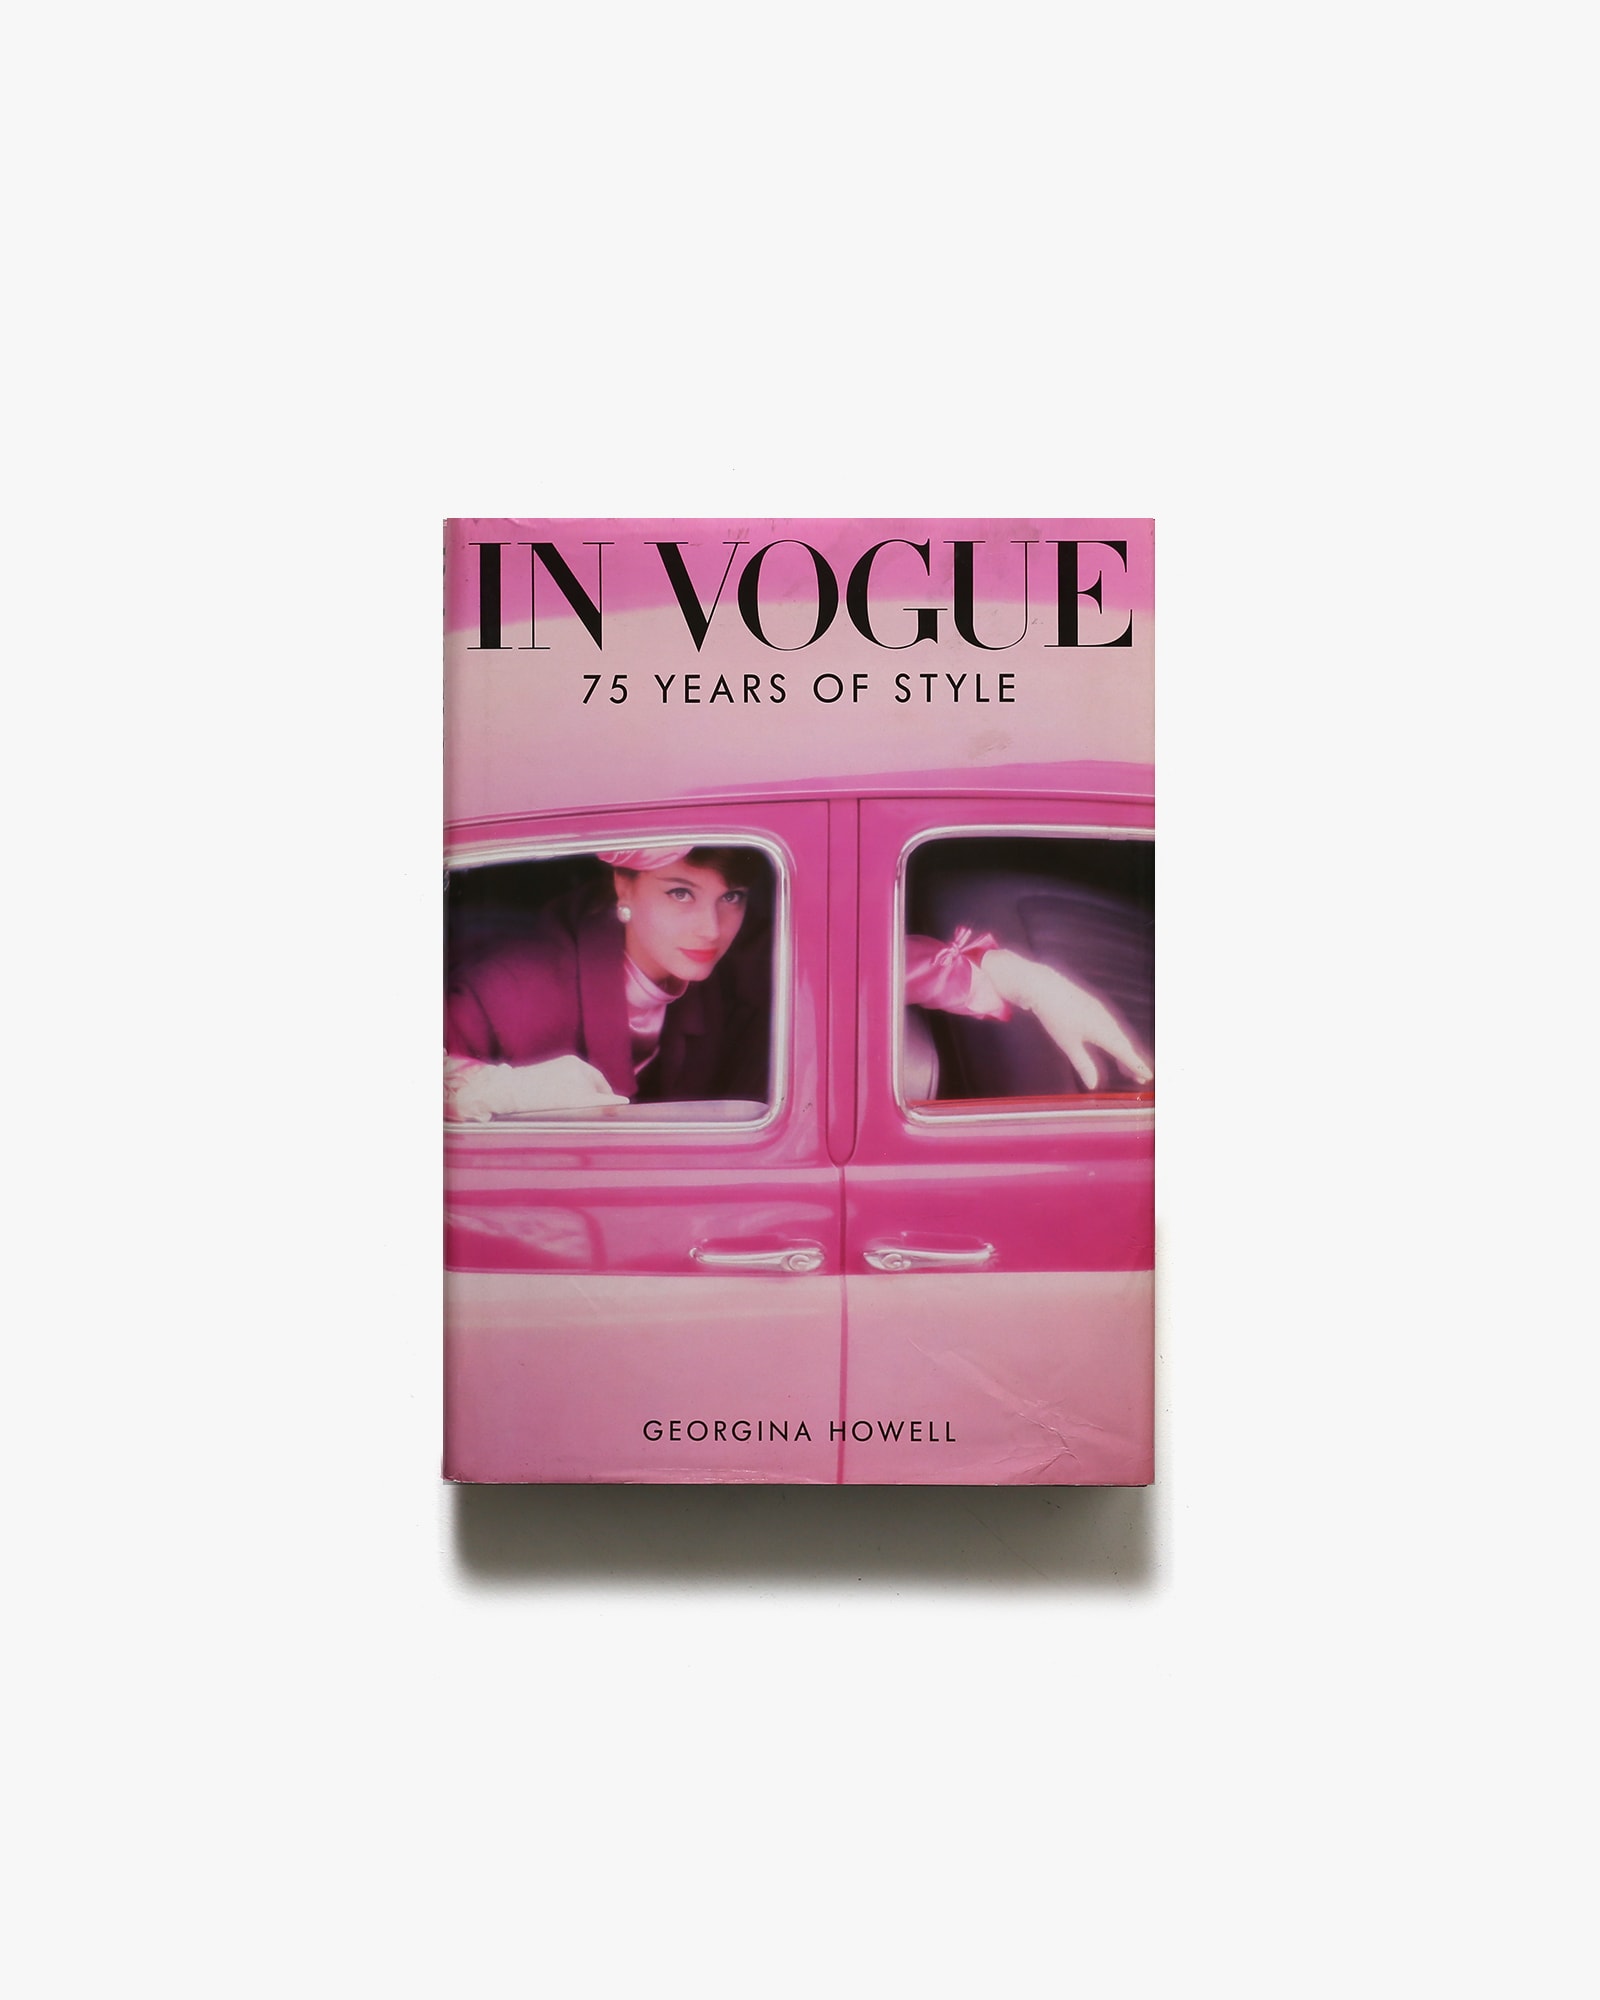 In Vogue 75 Years of Style